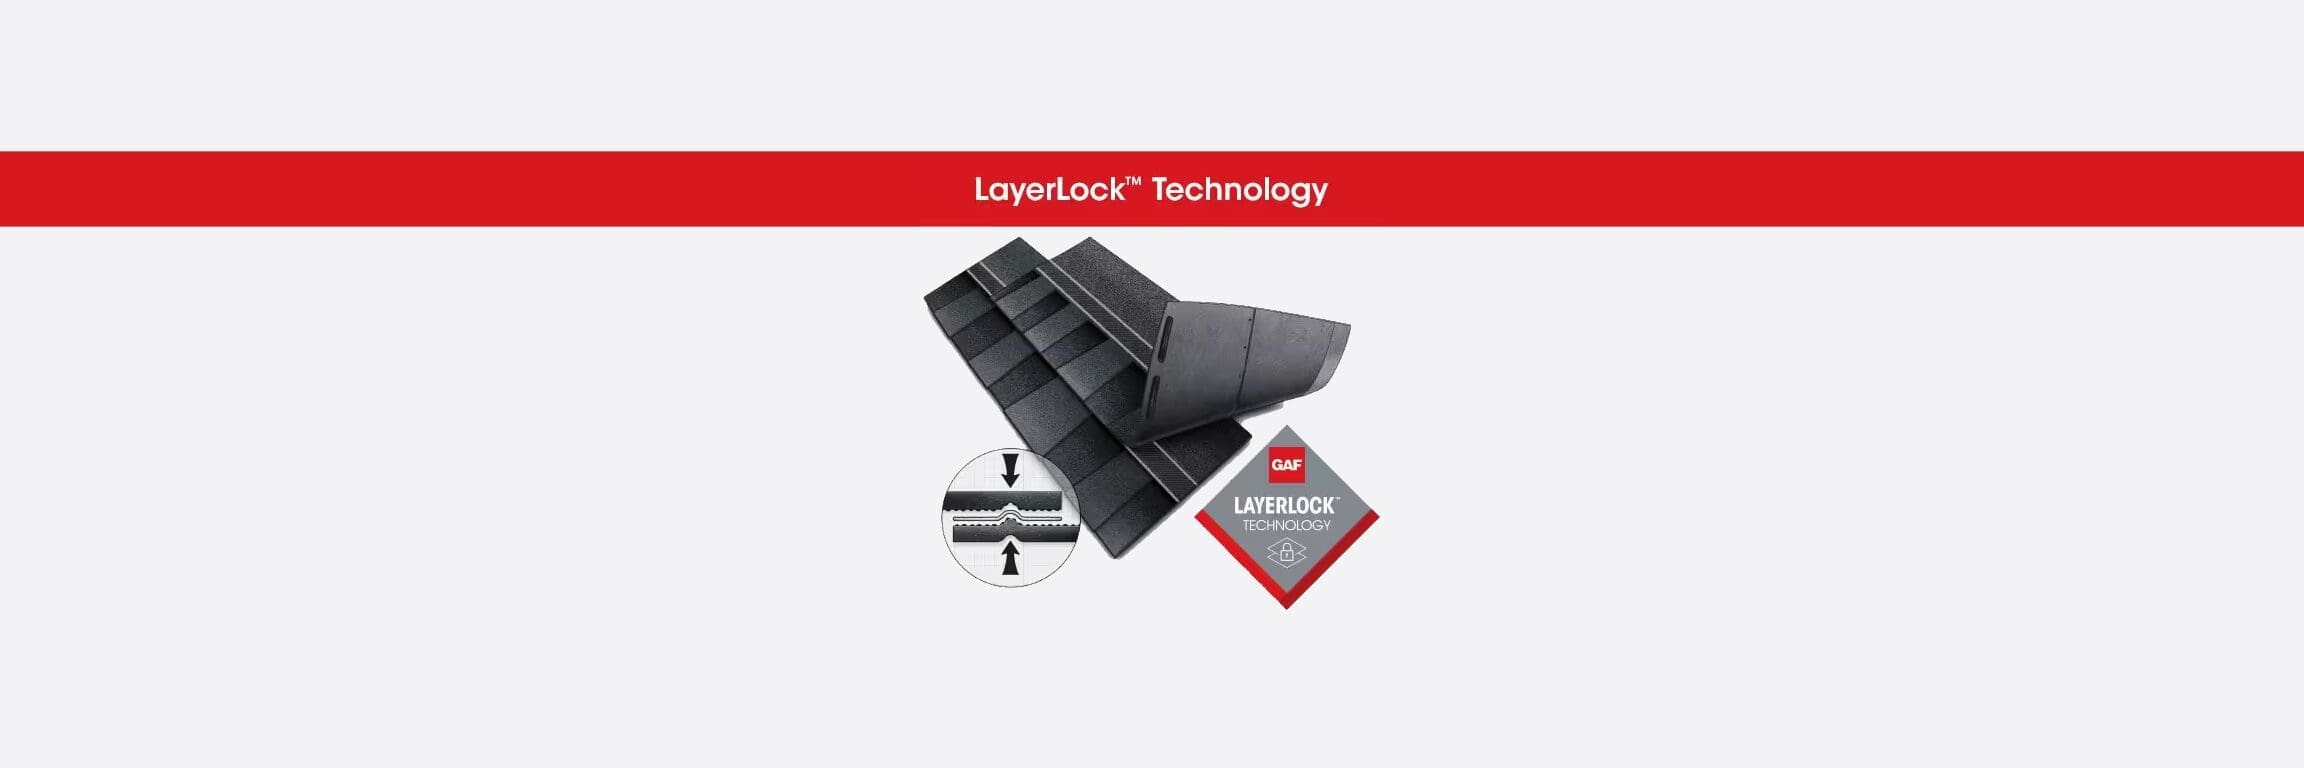 Roofing-Companies-LayerLock-Technology-GAF